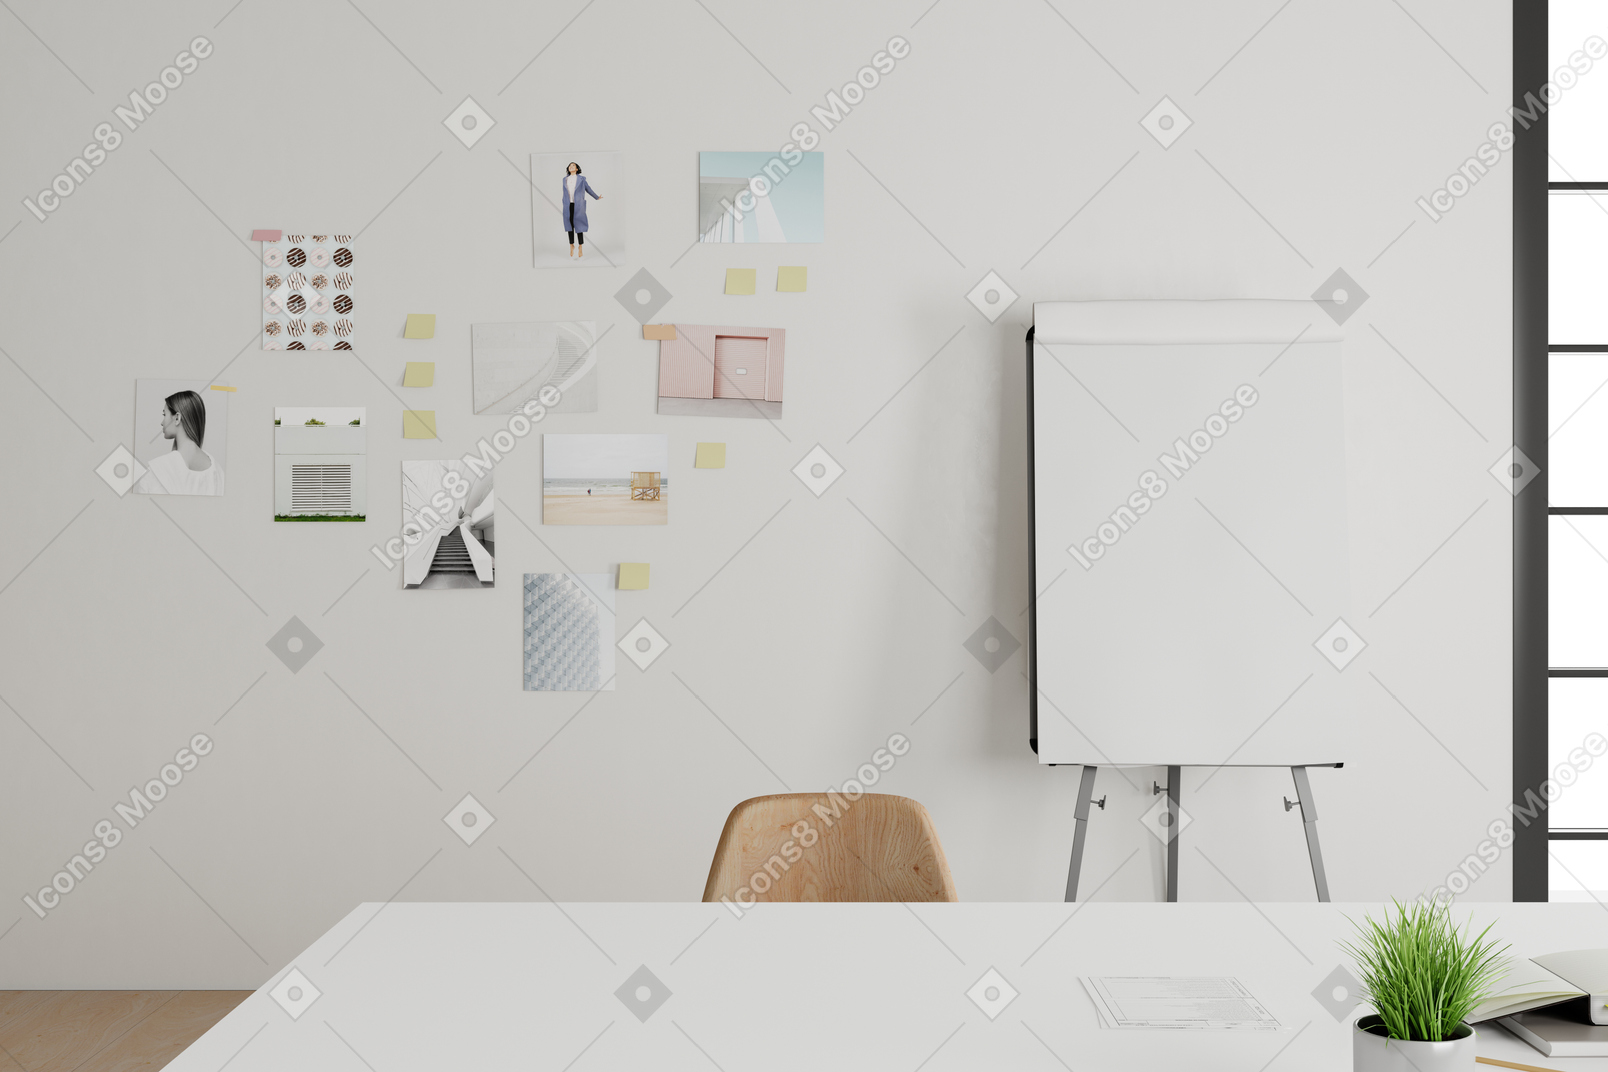 Room with presentation board and desk